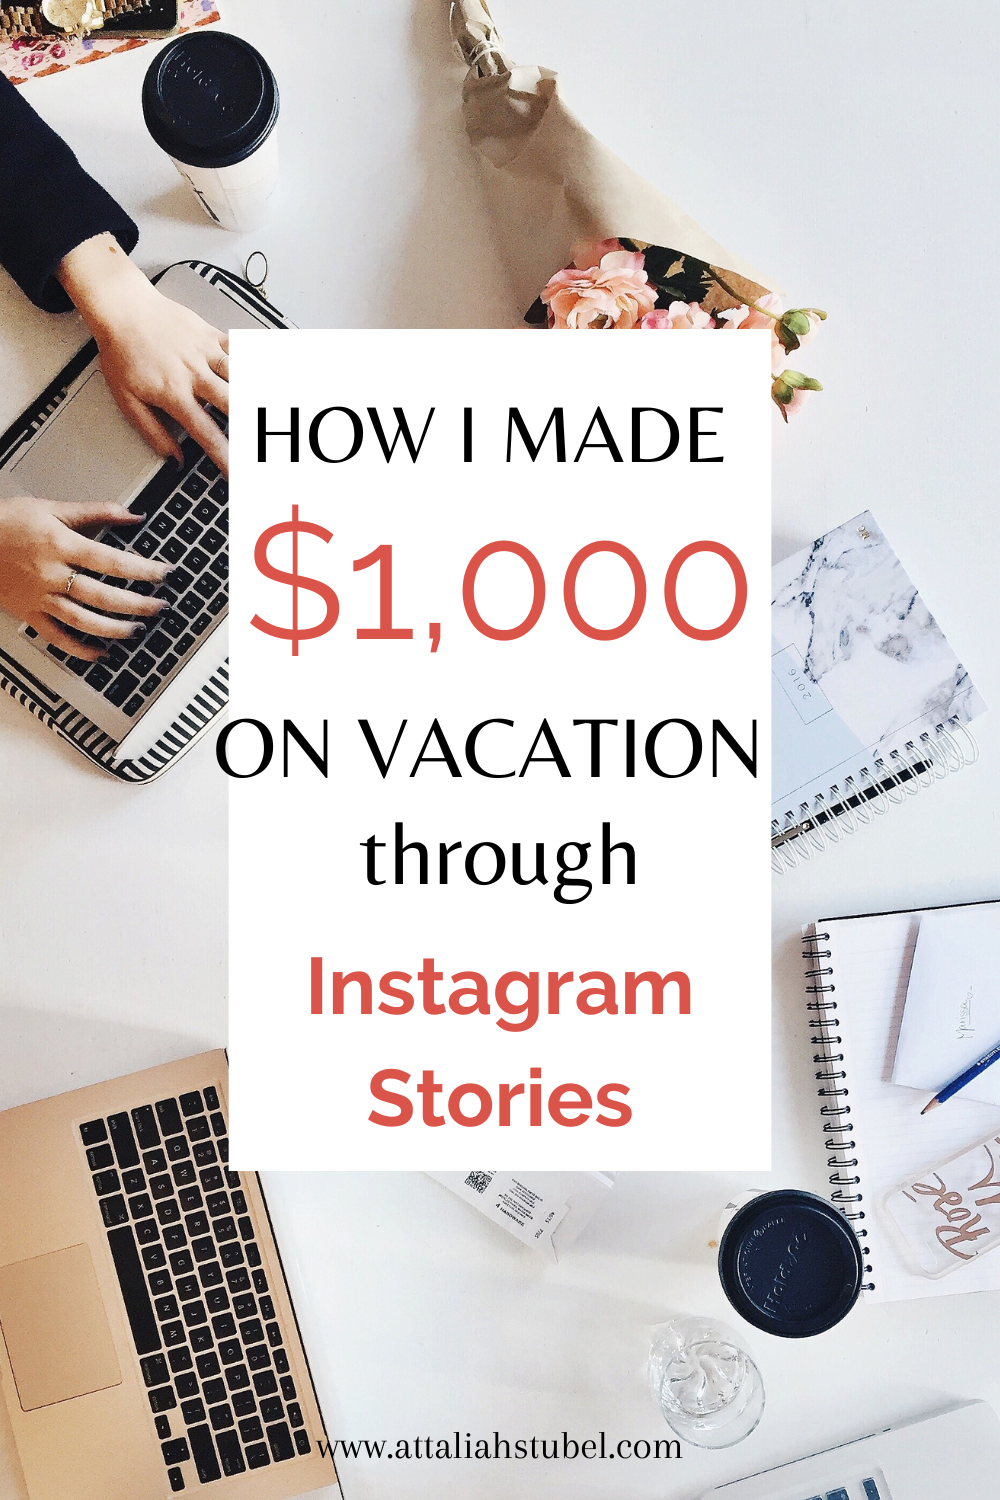 How I Made $1,000 on Vacation through Instagram Stories